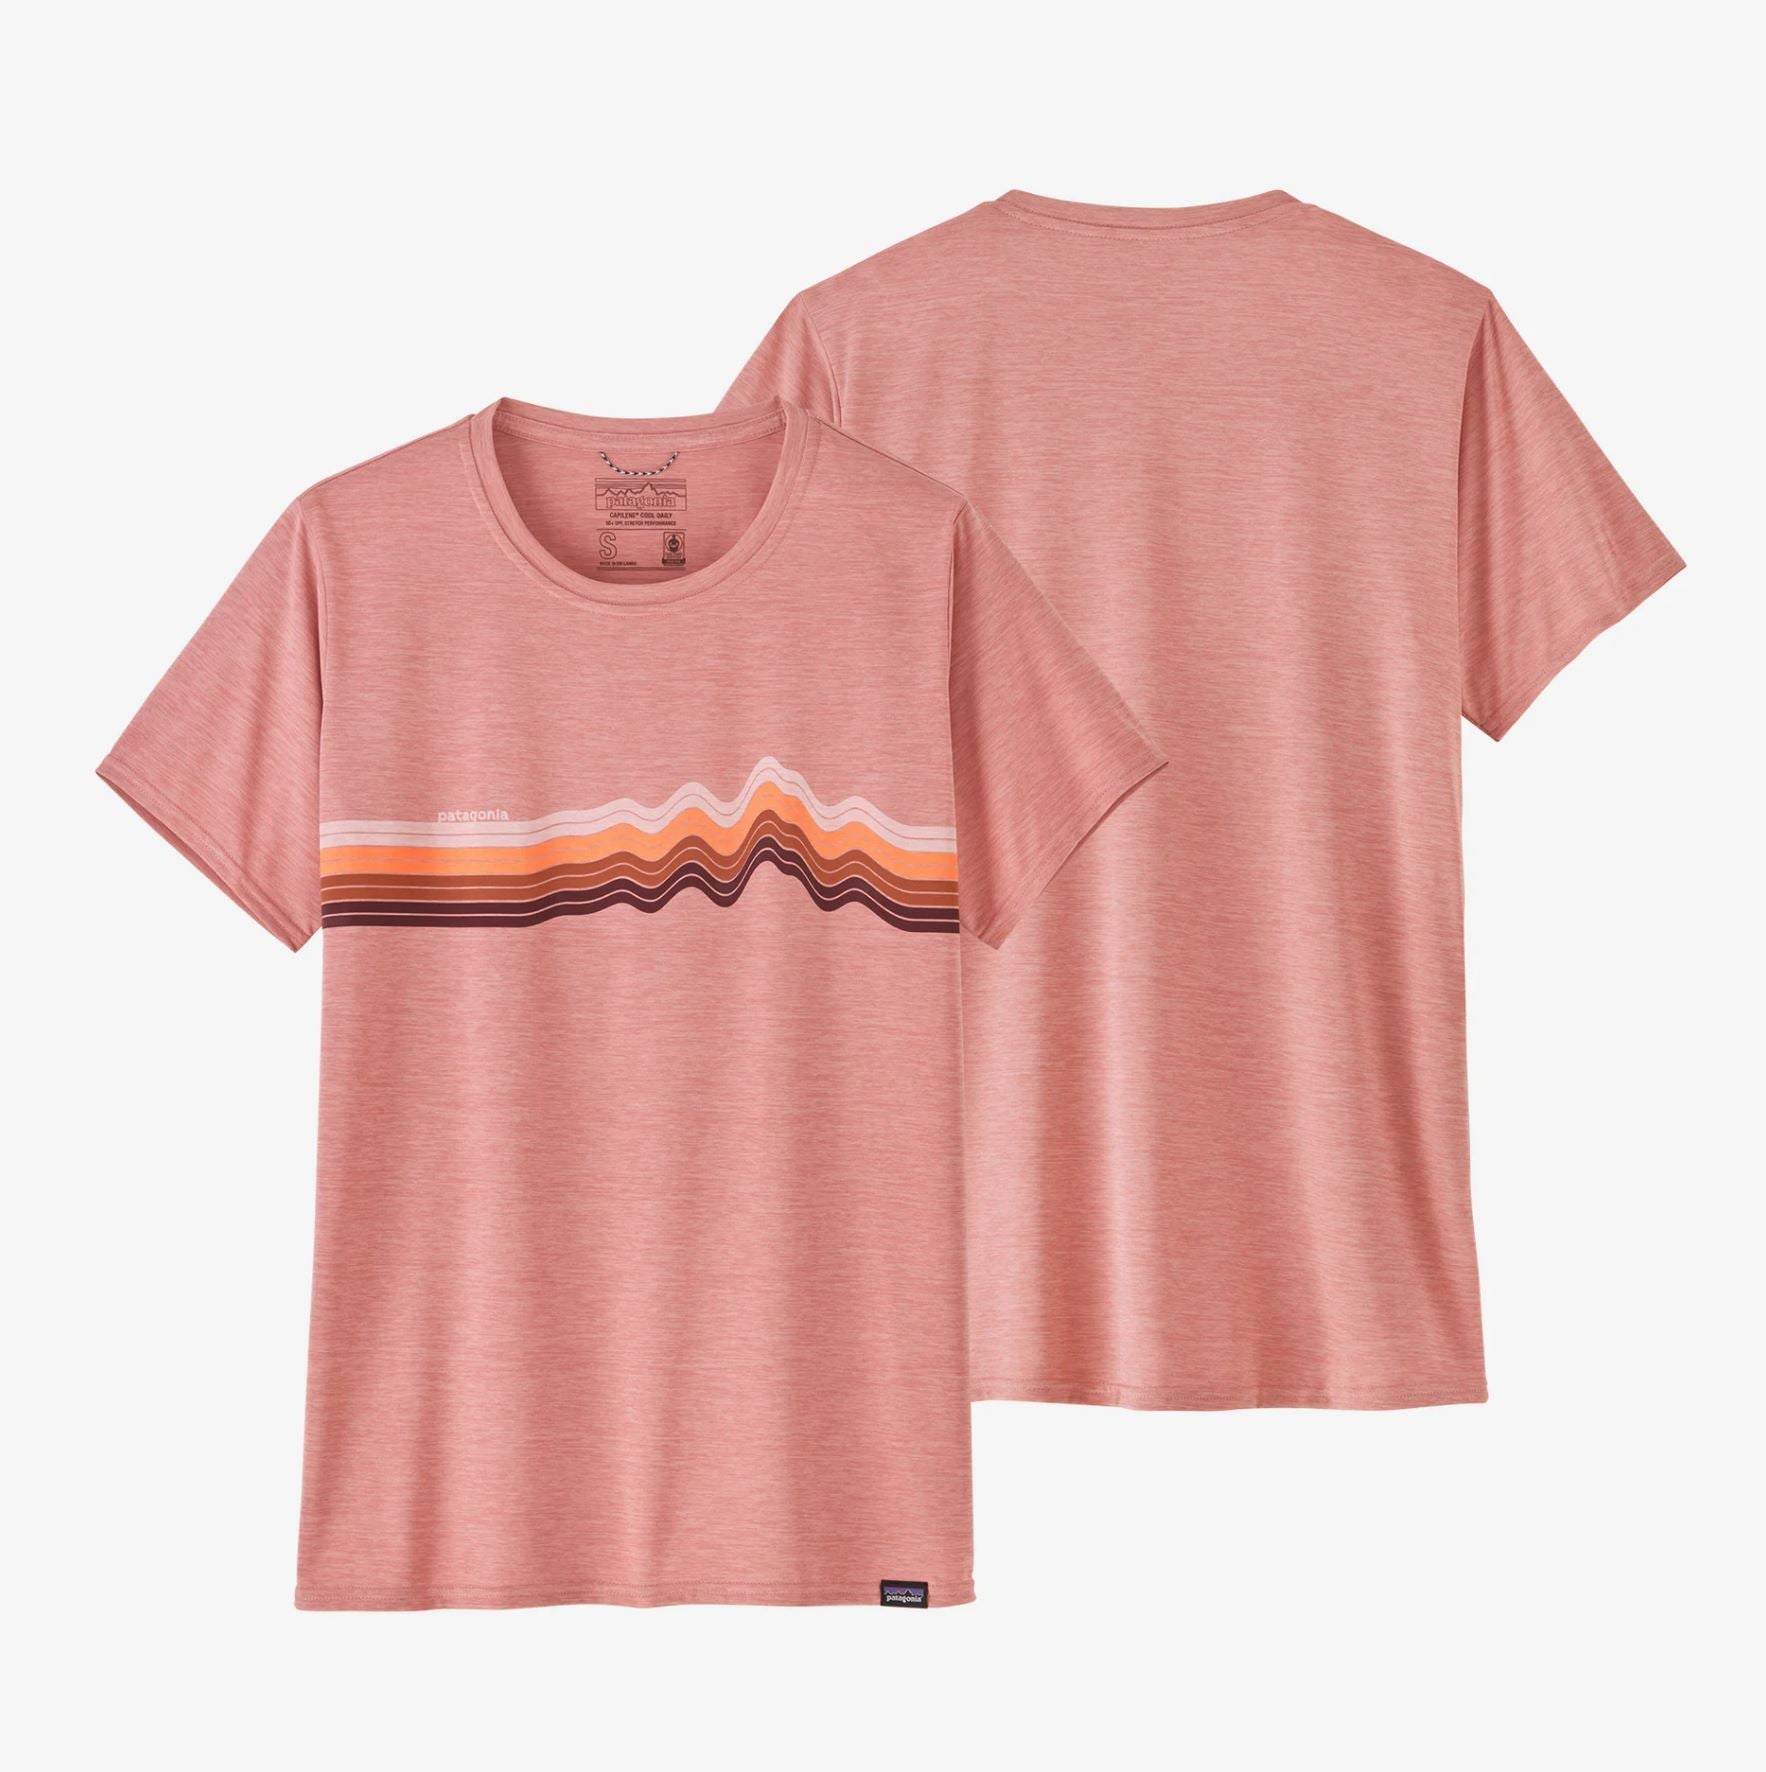 a front and back photo of the patagonia womens capilene cool daily graphic shirt in the color ridge rise stripe: sunfade pink x dye 